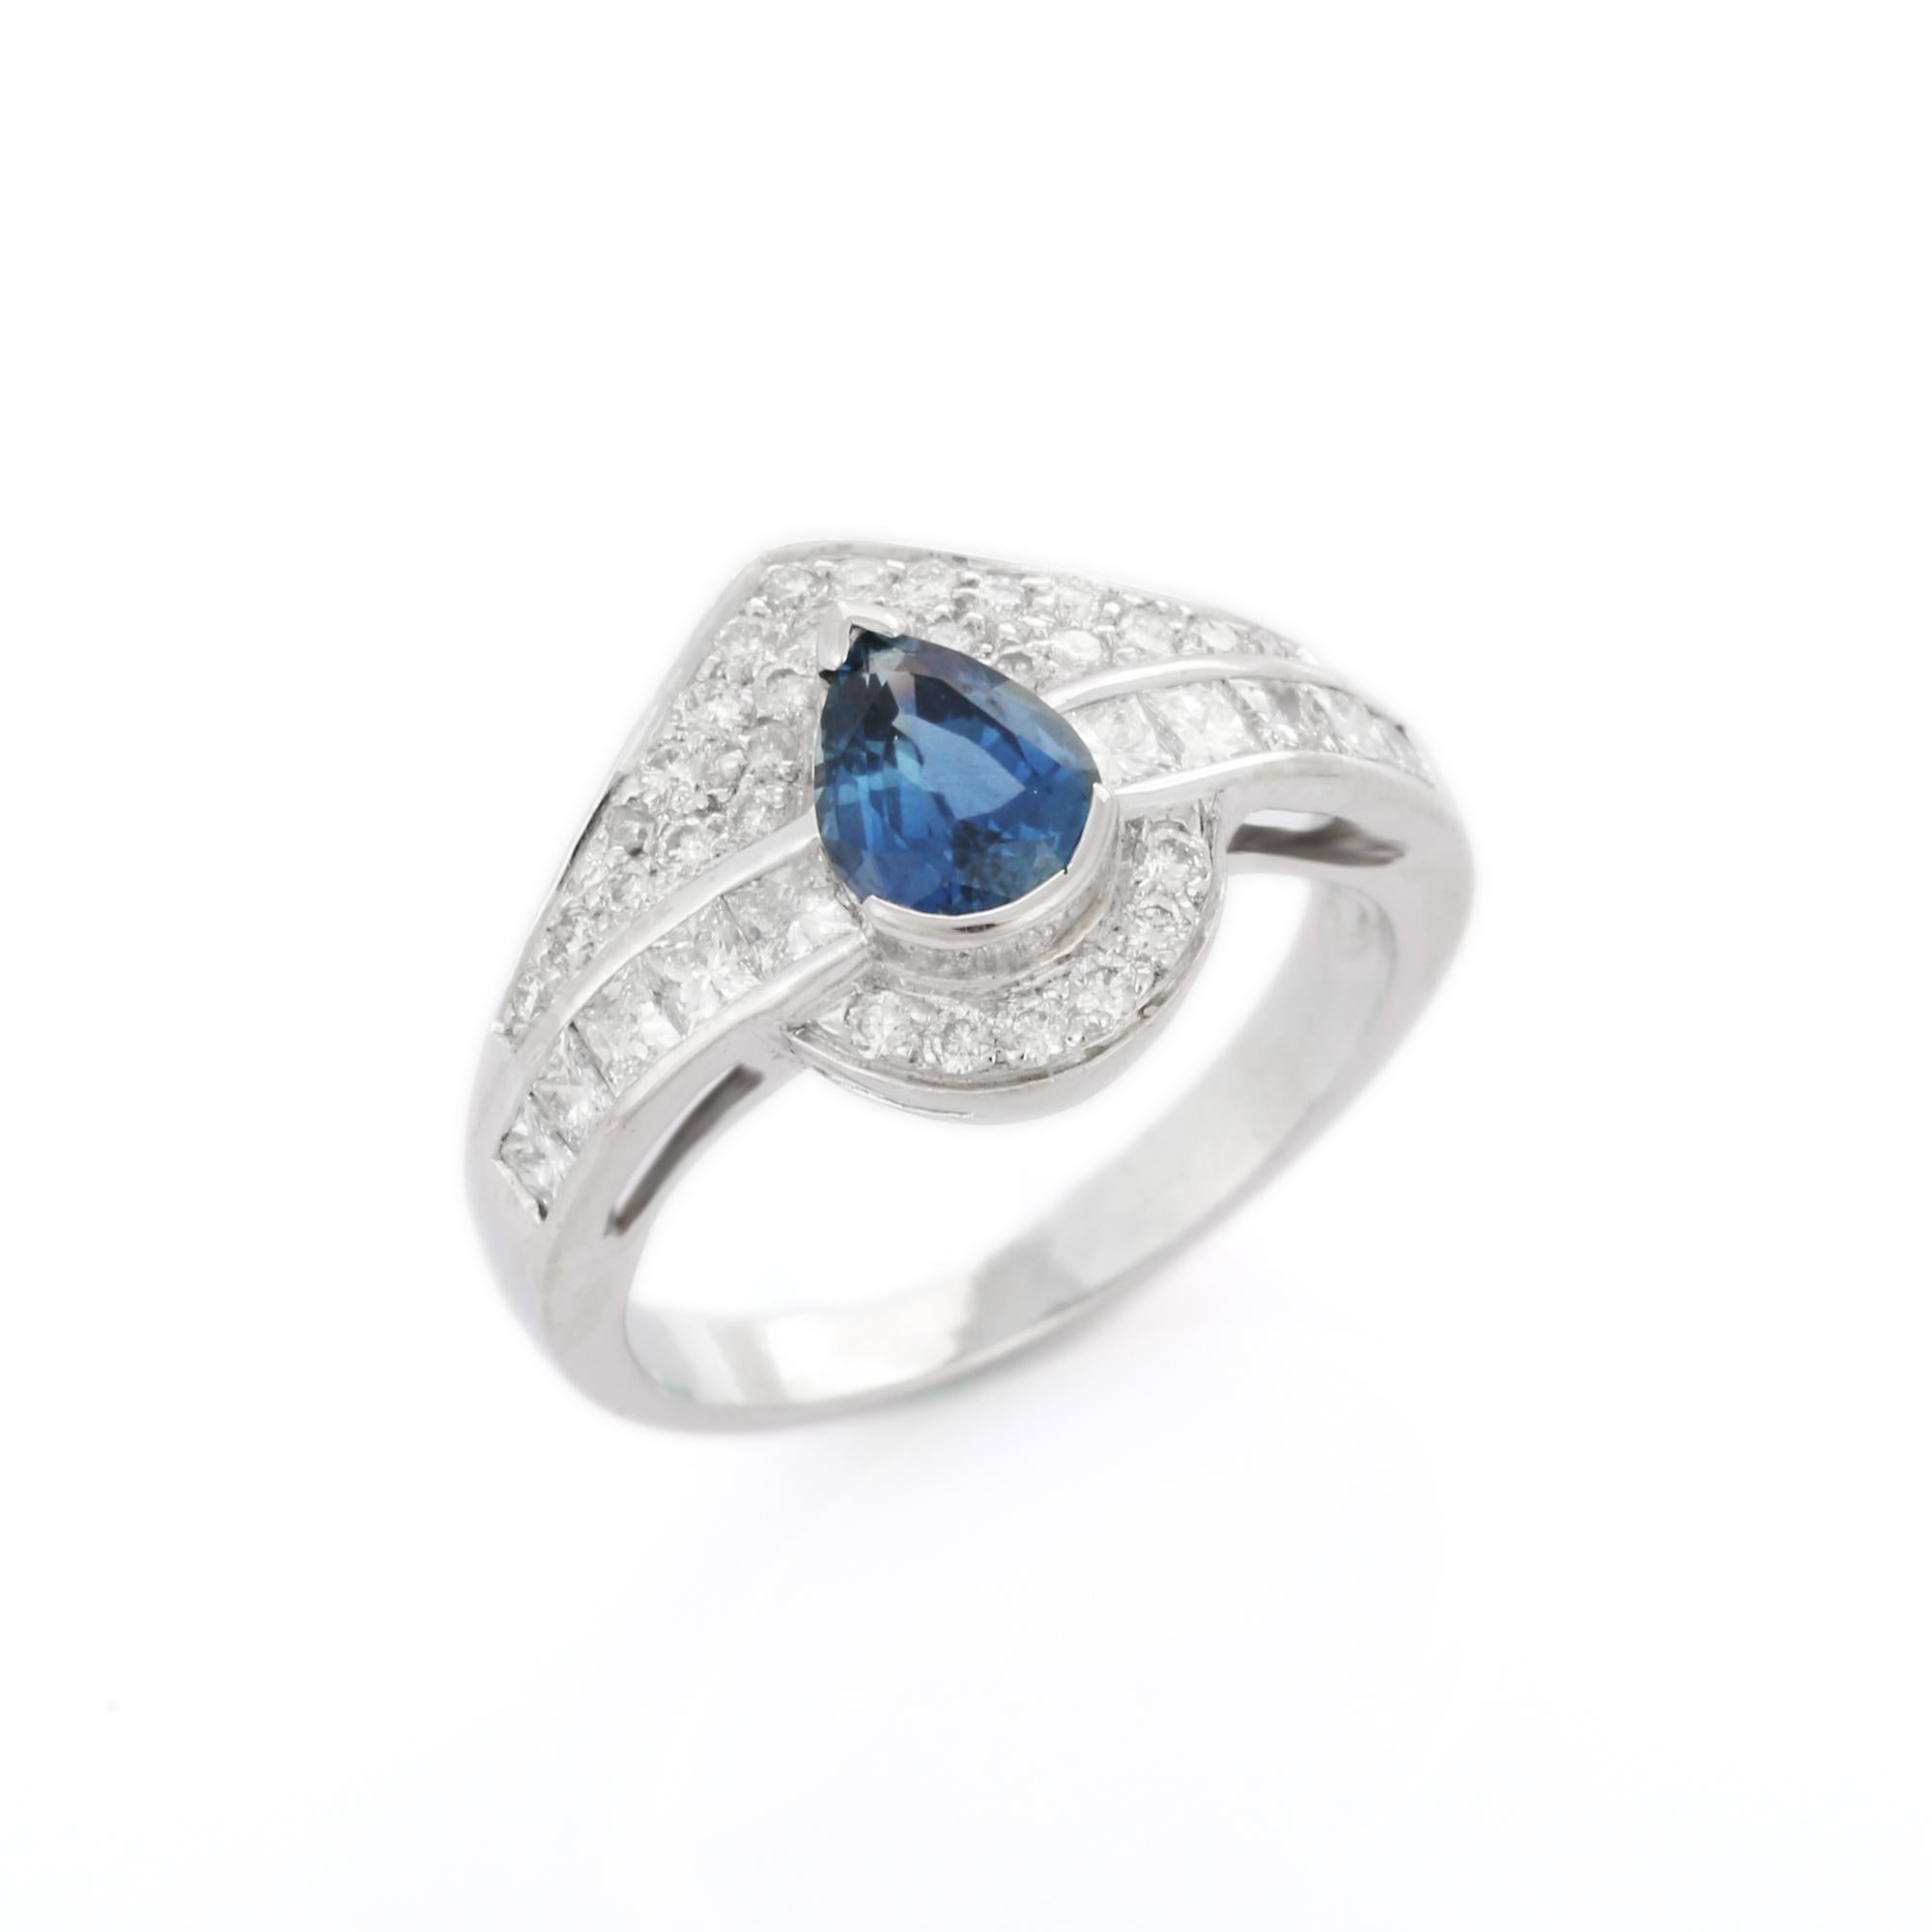 For Sale:  Regal Pear Cut Sapphire Diamond Wedding Ring in 18K White Gold 2